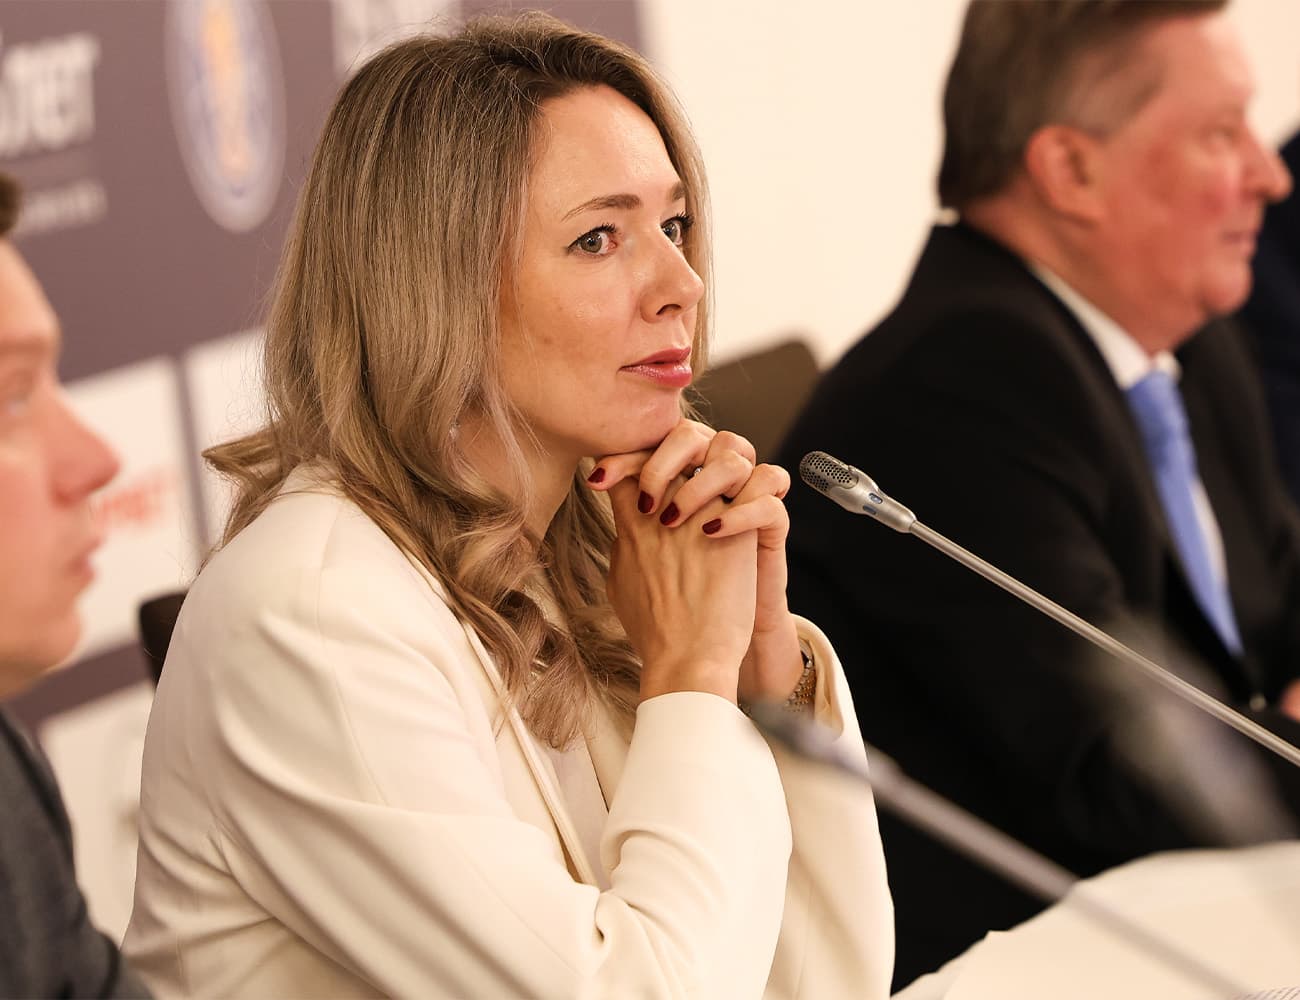 Ilona Korstin: We plan to equalize bonuses for clubs for marketing and sports championships in the future